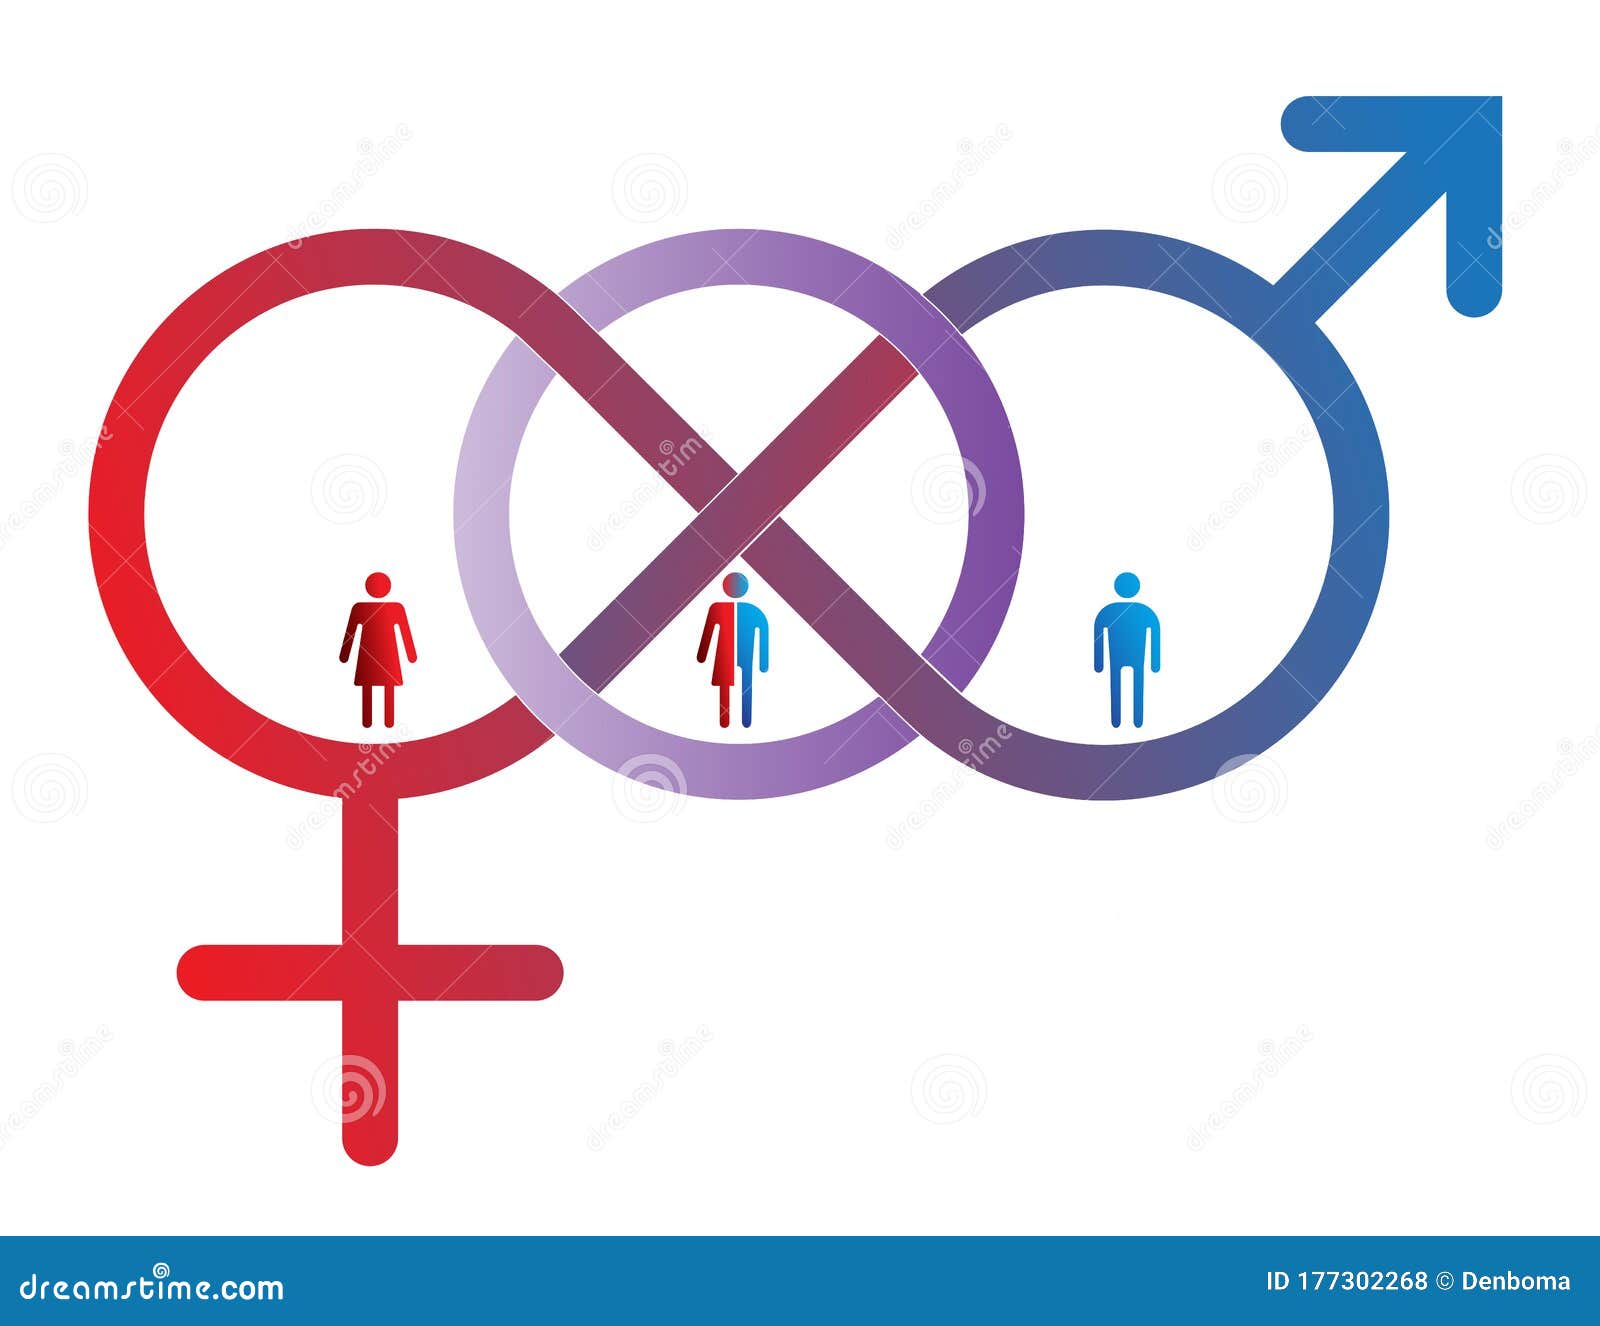 An Sign Of Woman Gender Male Illutrator Stock Illustration 